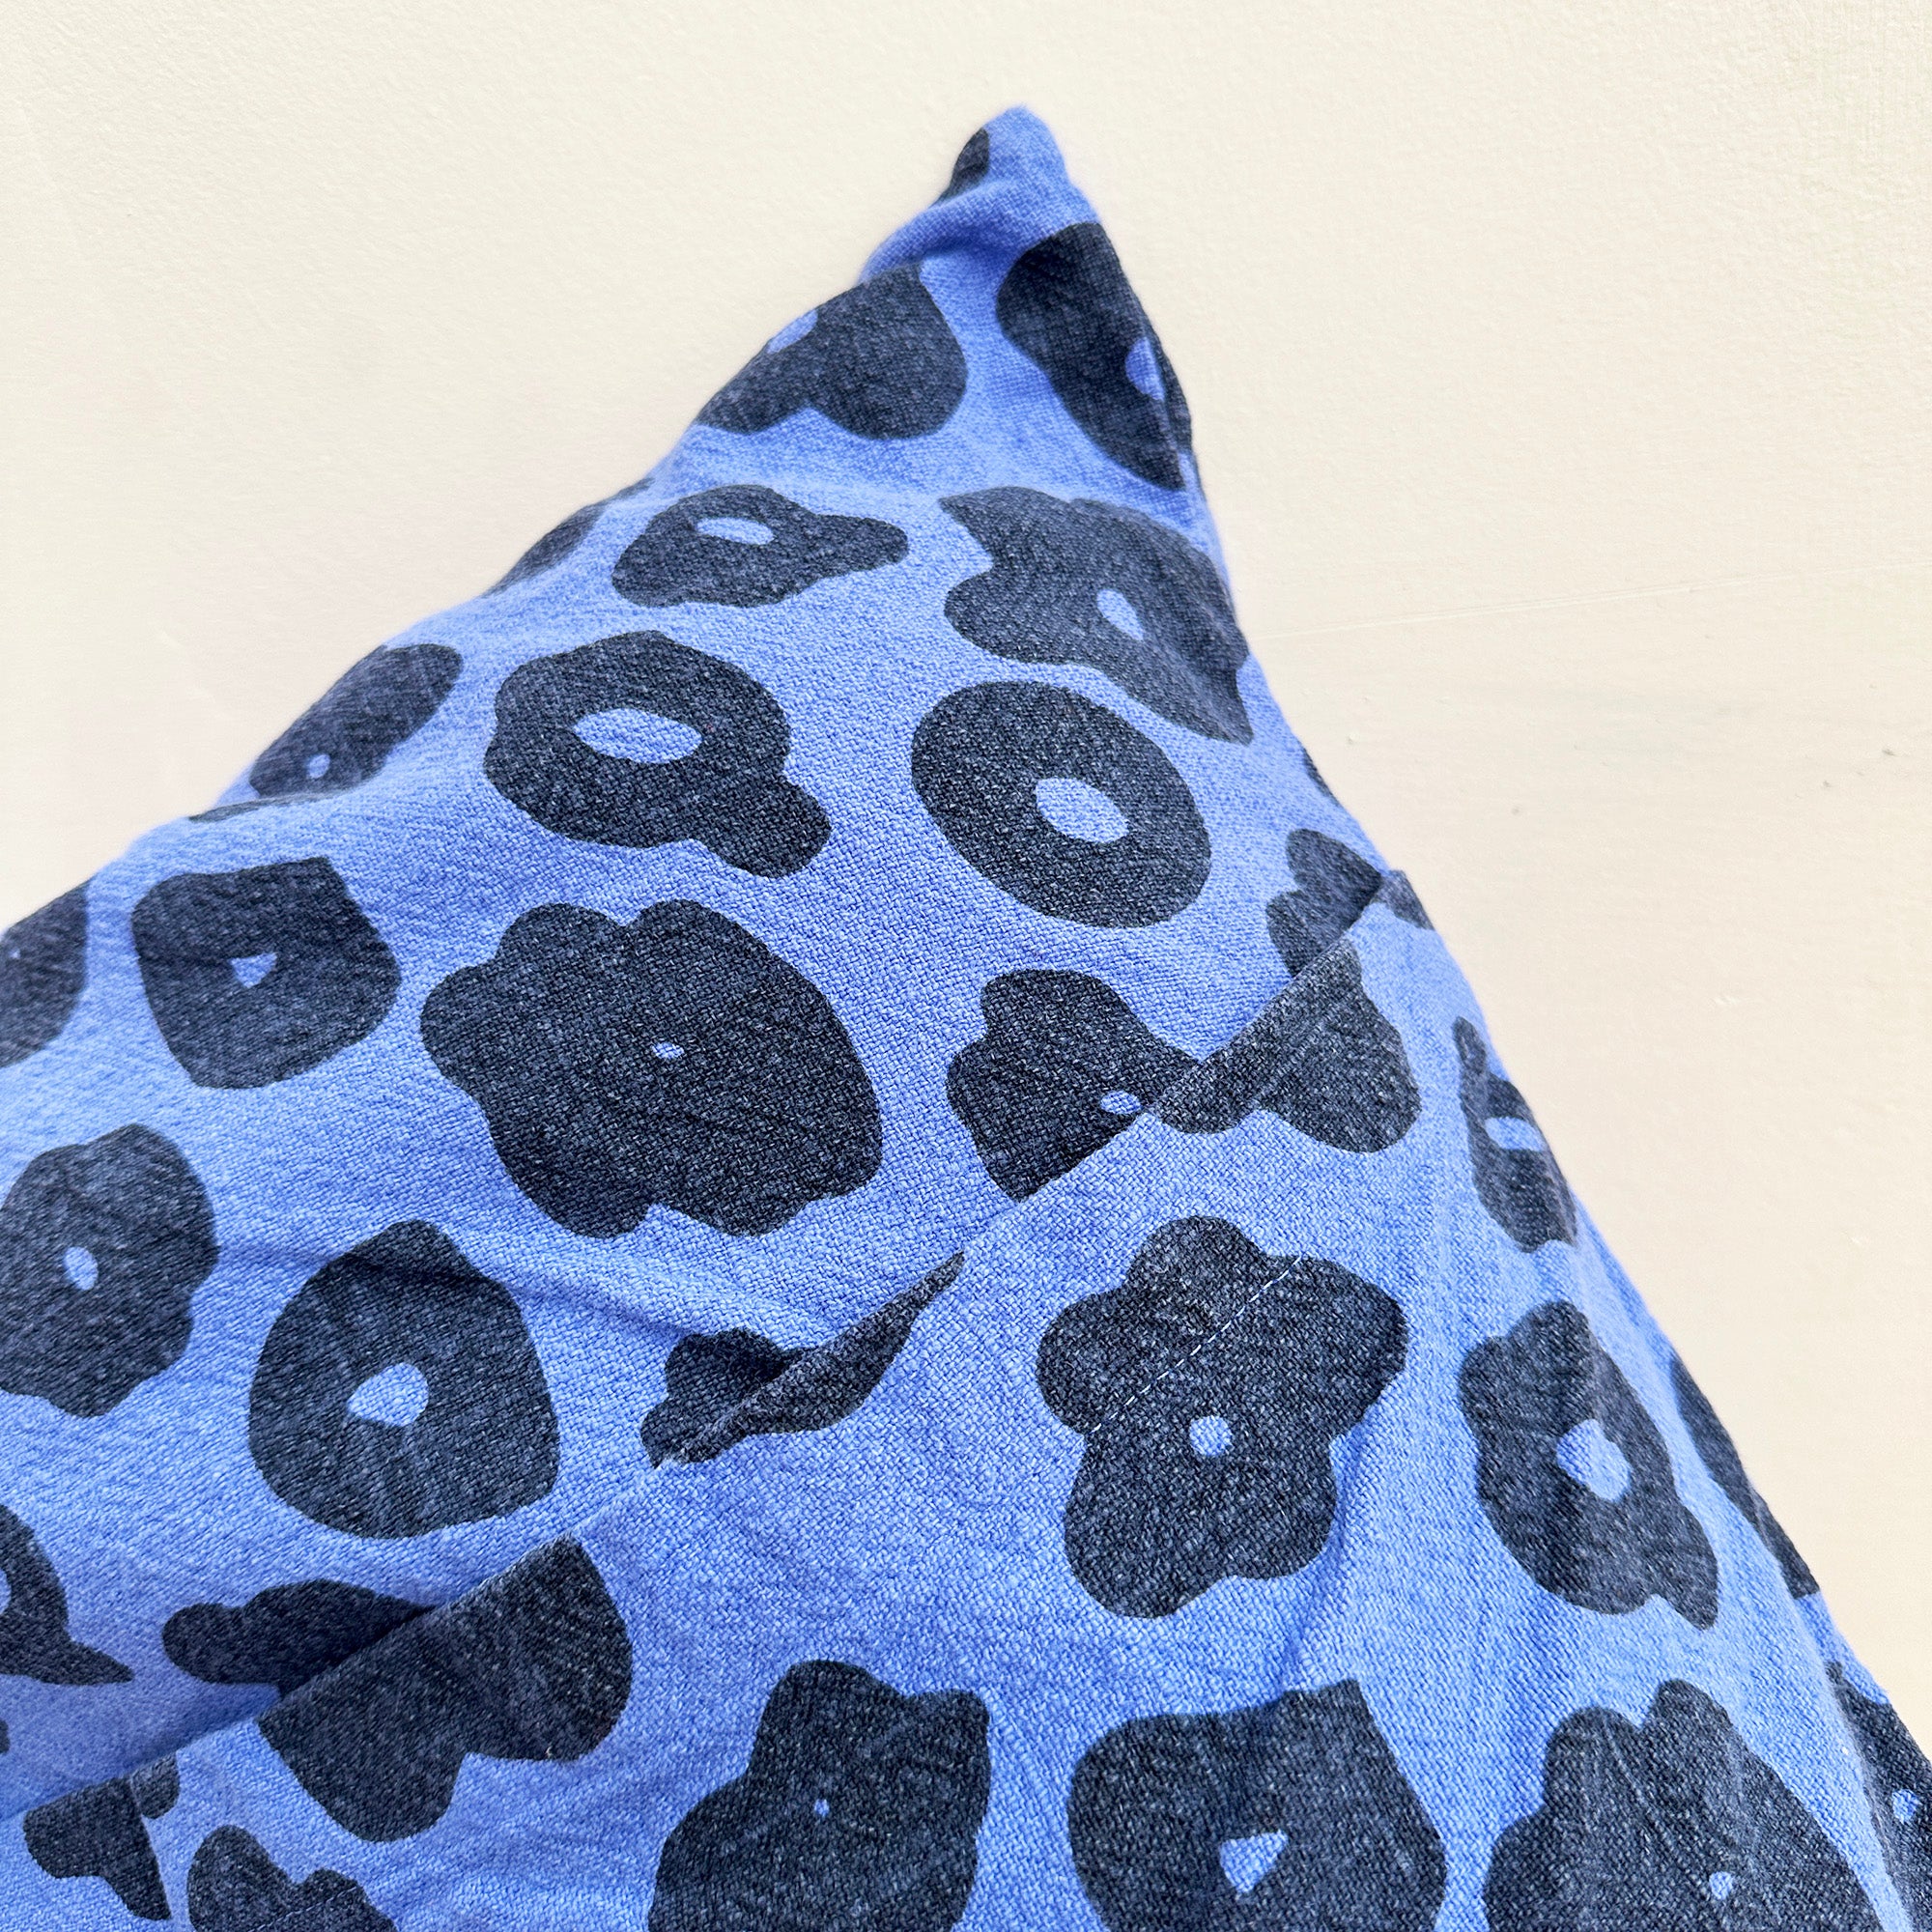 The Square Throw Pillow - Celeste in Faded Black and Periwinkle